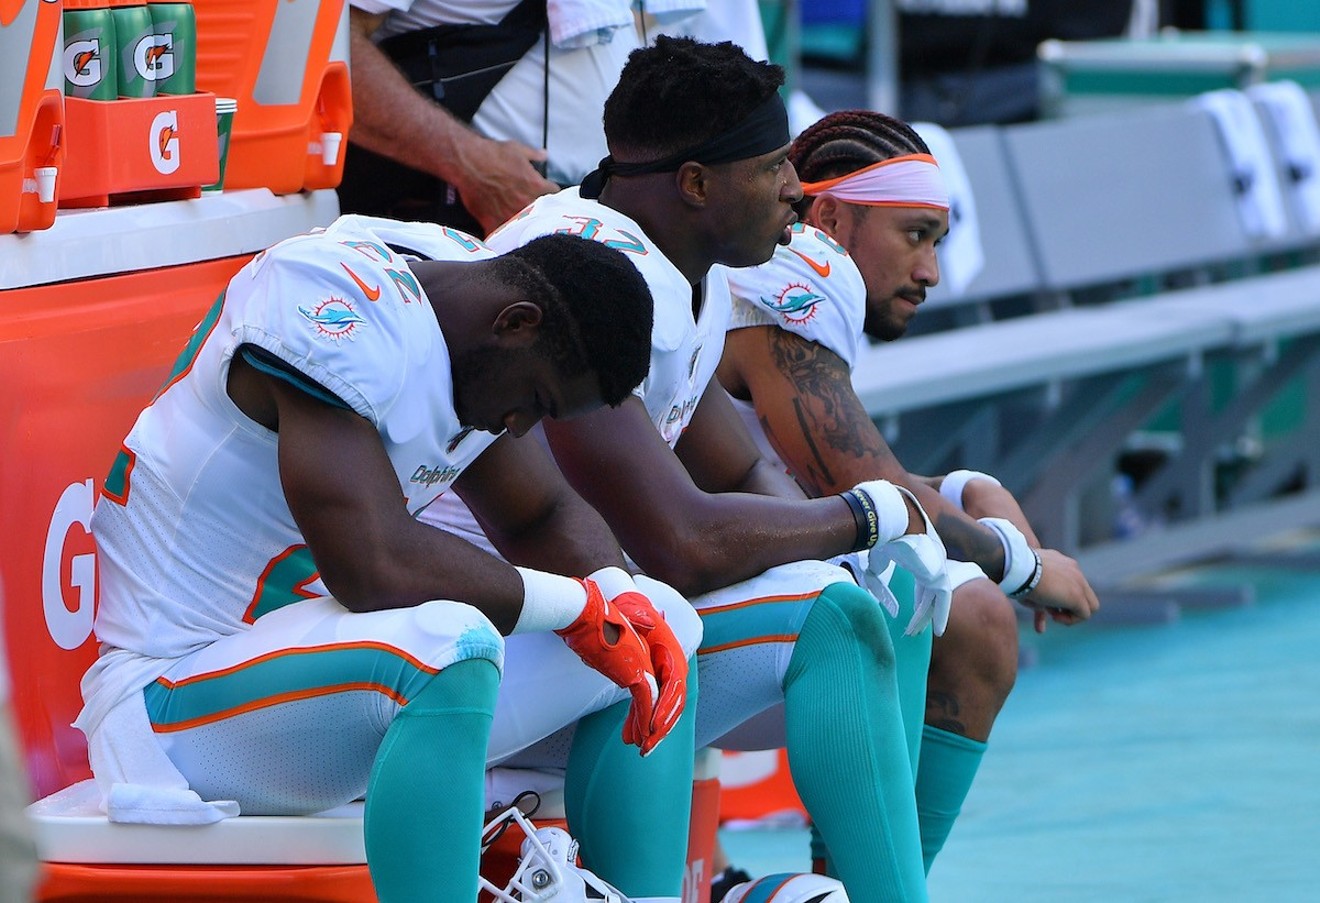 The 2019 Miami Dolphins are destined to be a historically terrible team.